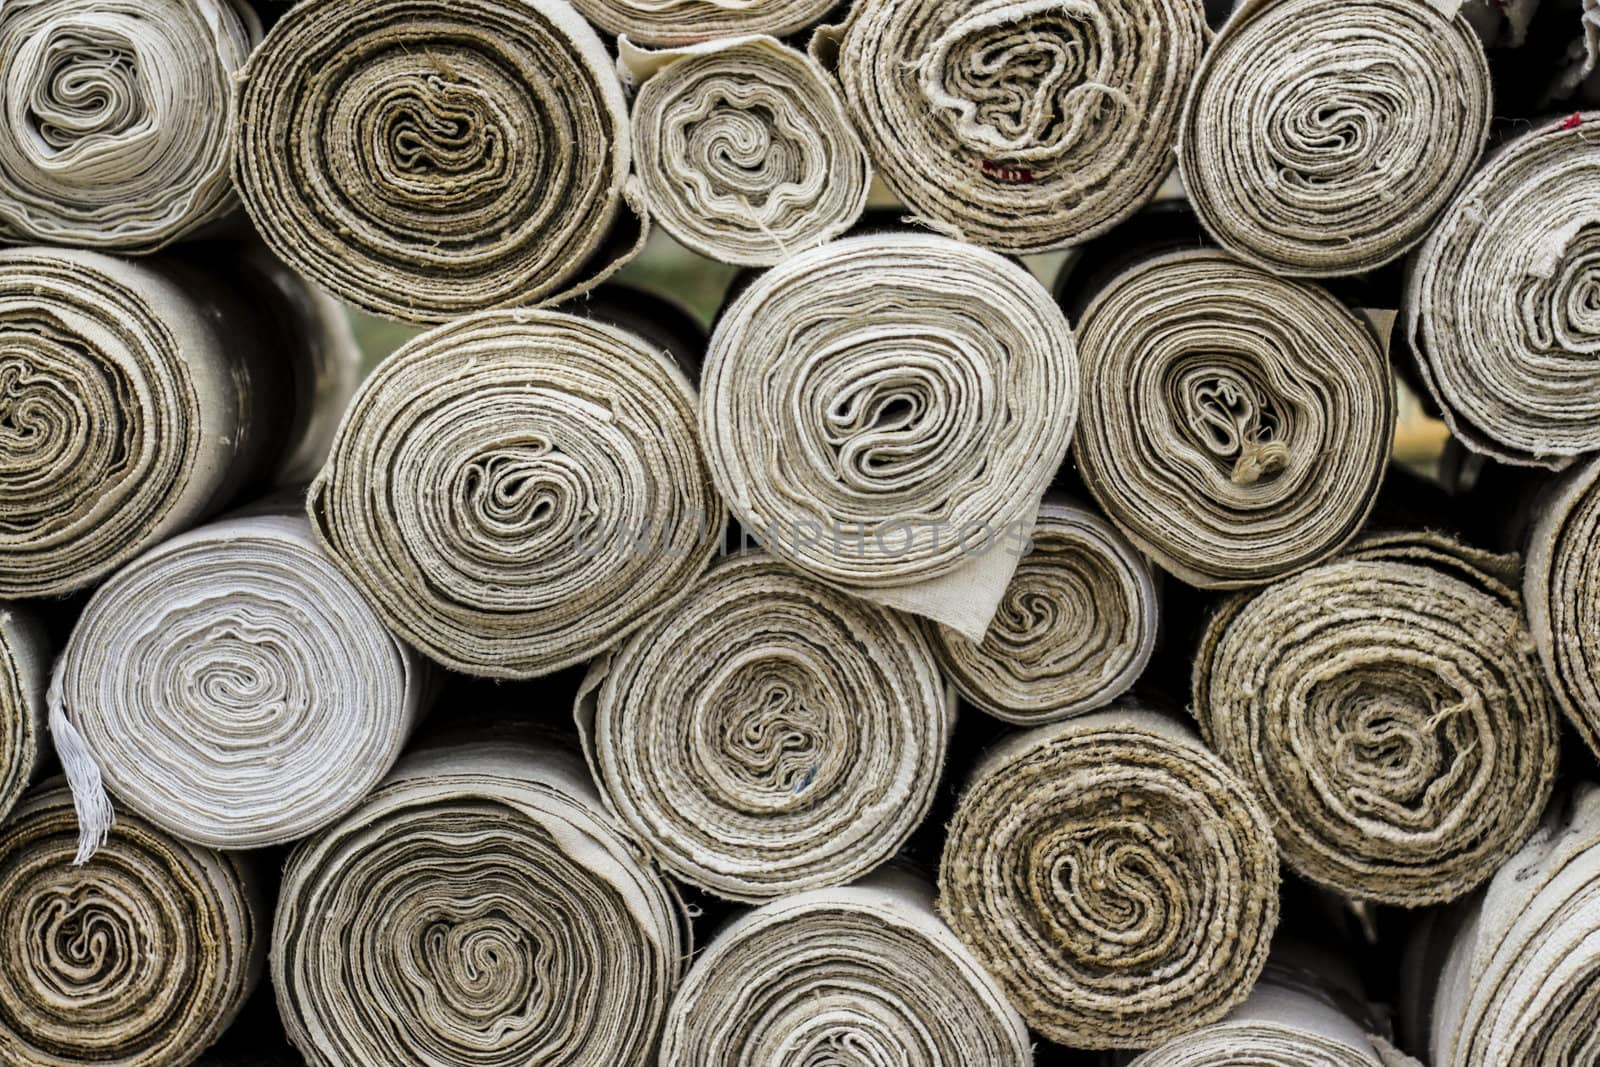 Rolls of textile material by chuckyq1